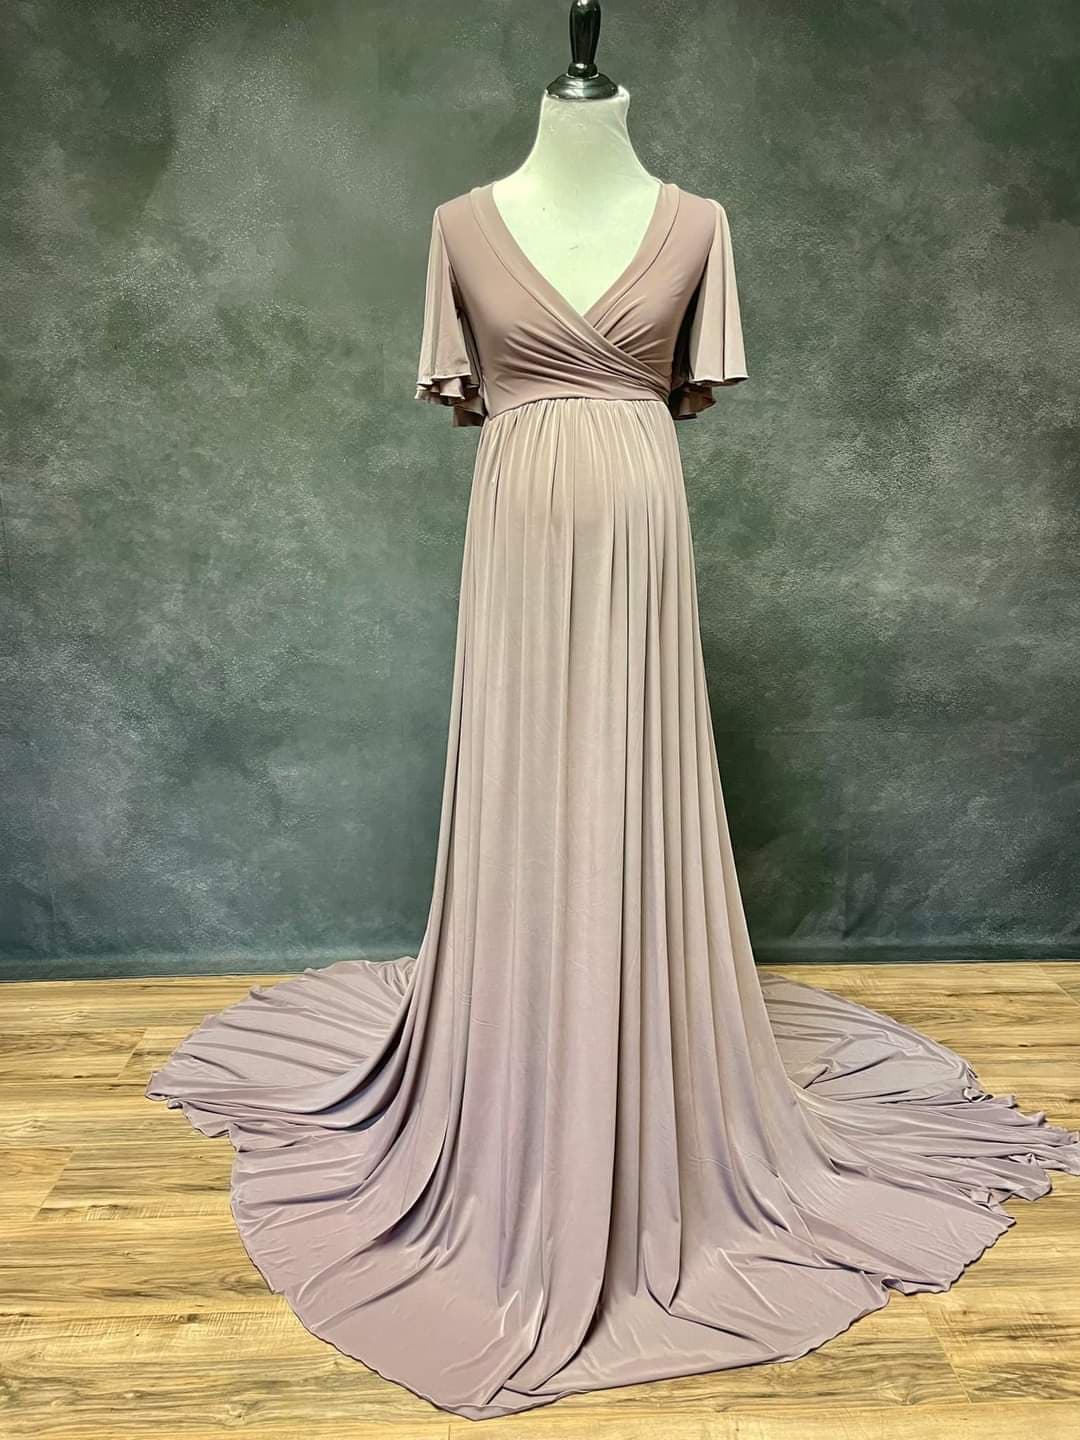 Dusty Mauve Everly Gown - maternity photoshoot dress